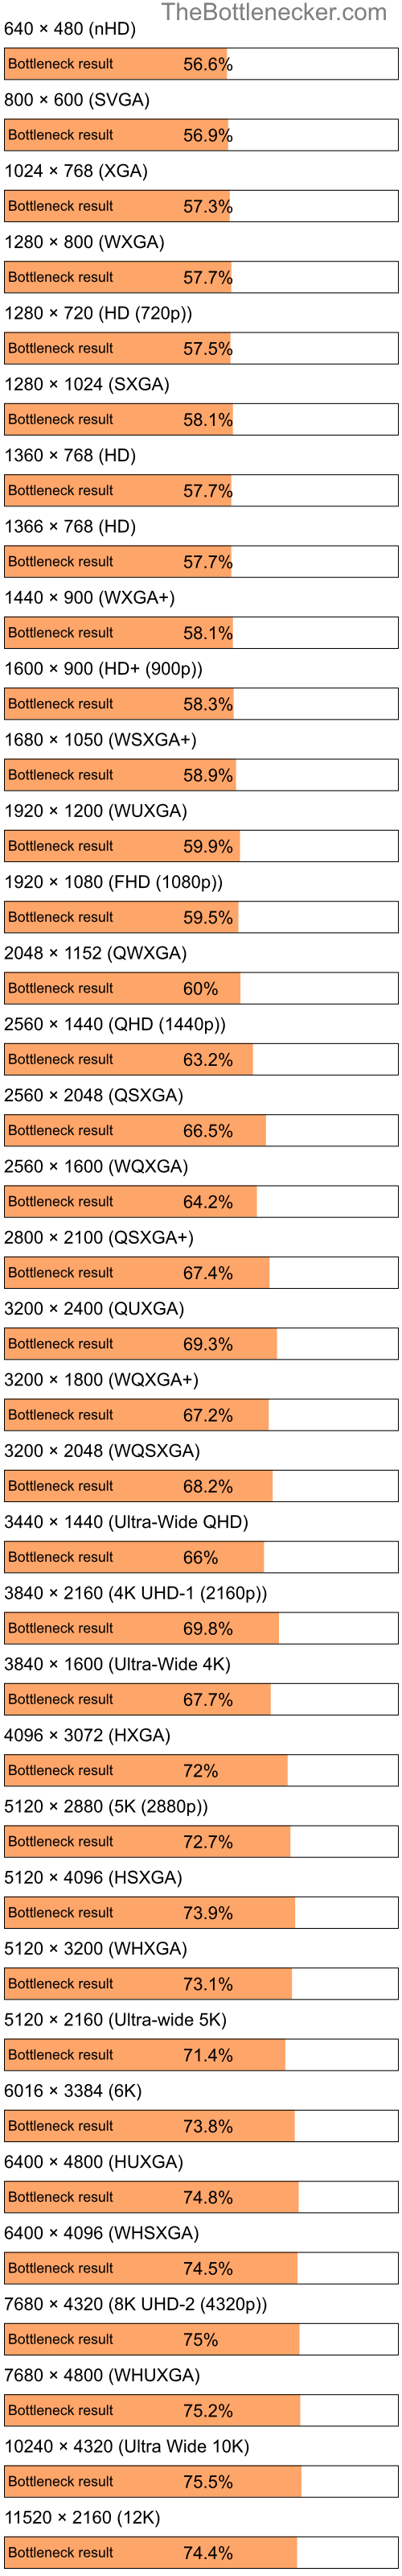 Bottleneck results by resolution for Intel Pentium 4 and NVIDIA GeForce Go 6600 in Processor Intense Tasks